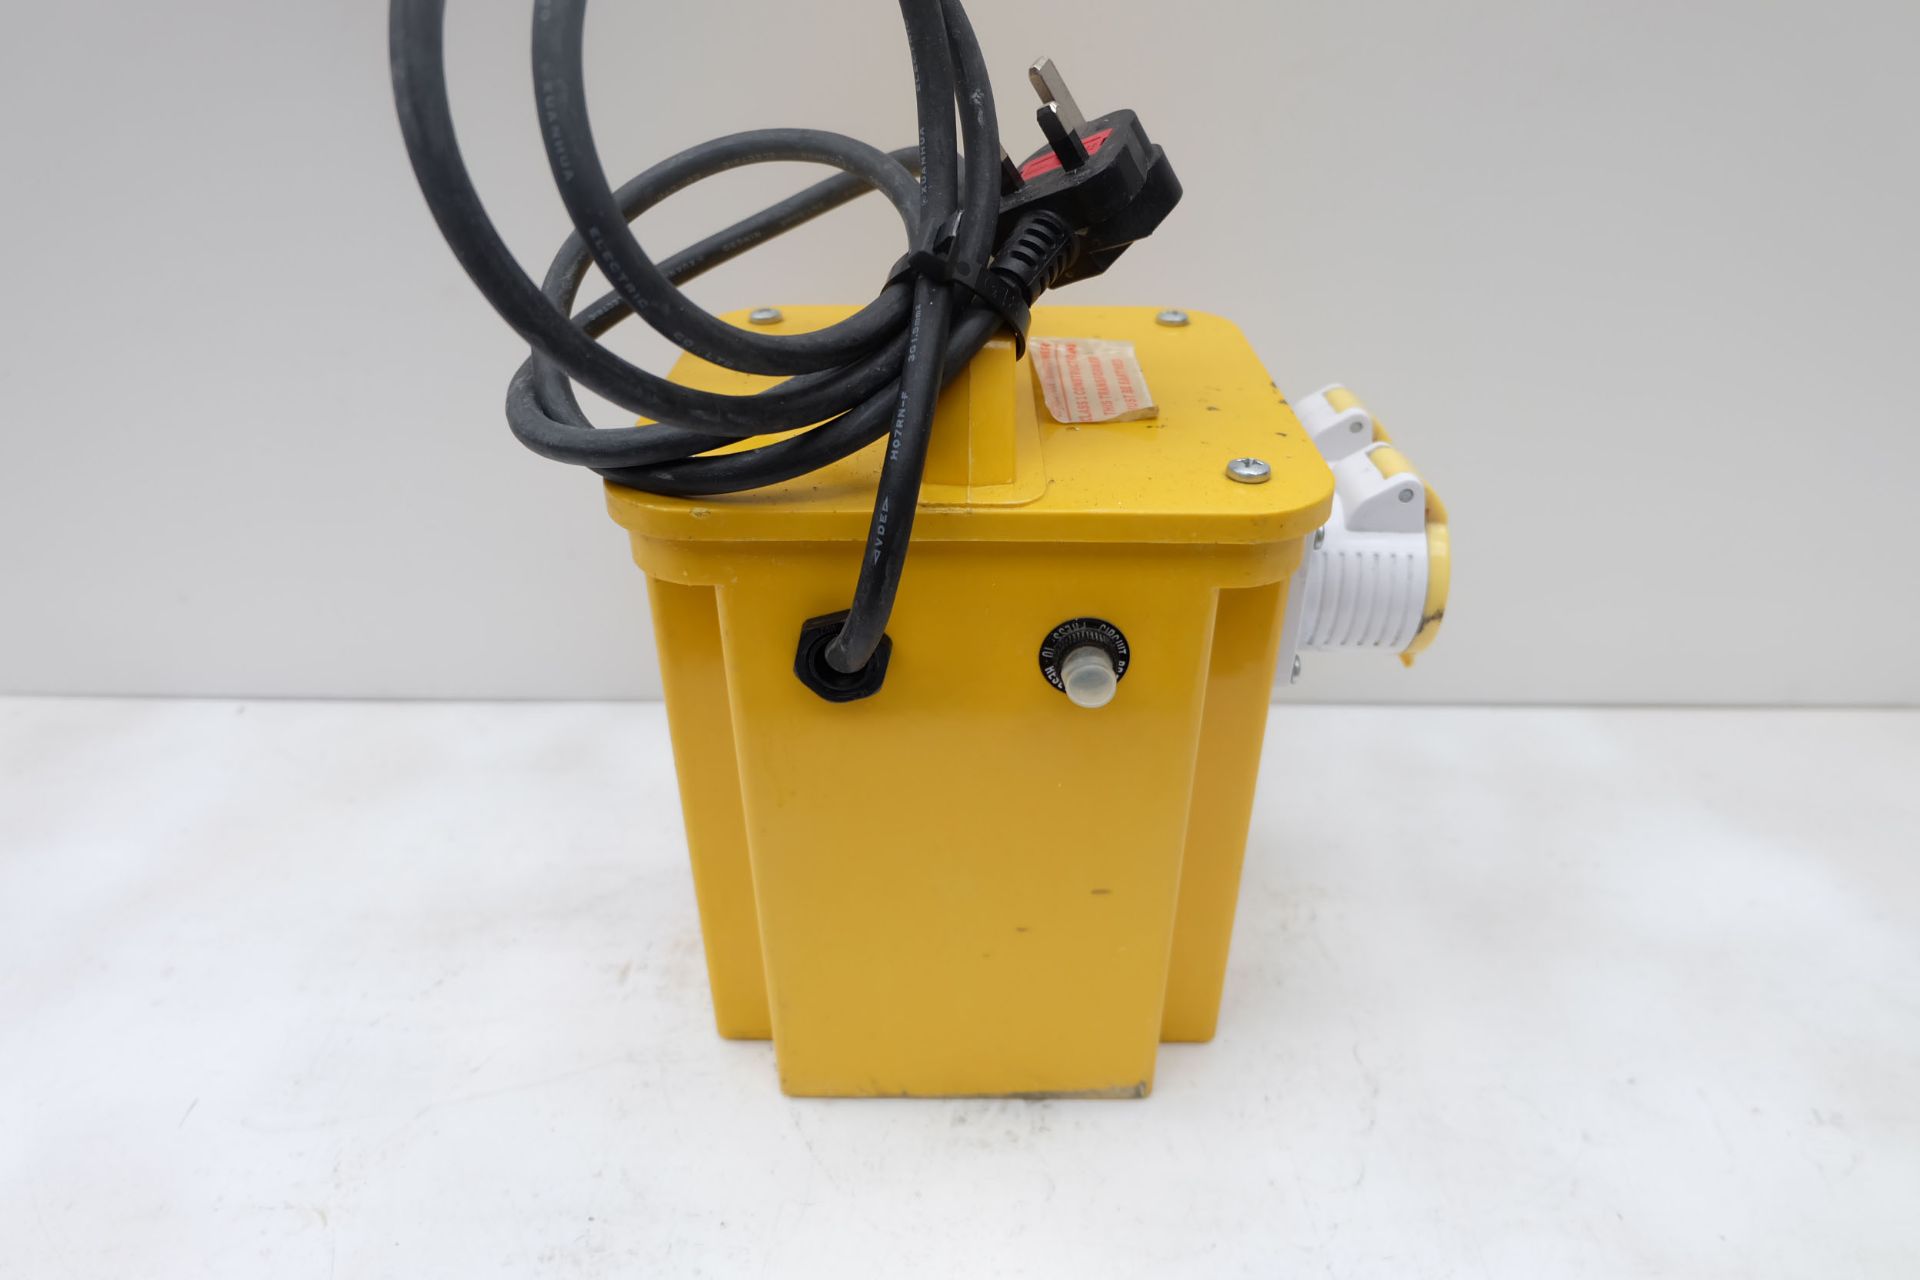 240V to 110V Double Socket Power Tool Step Down Transformer. - Image 4 of 6